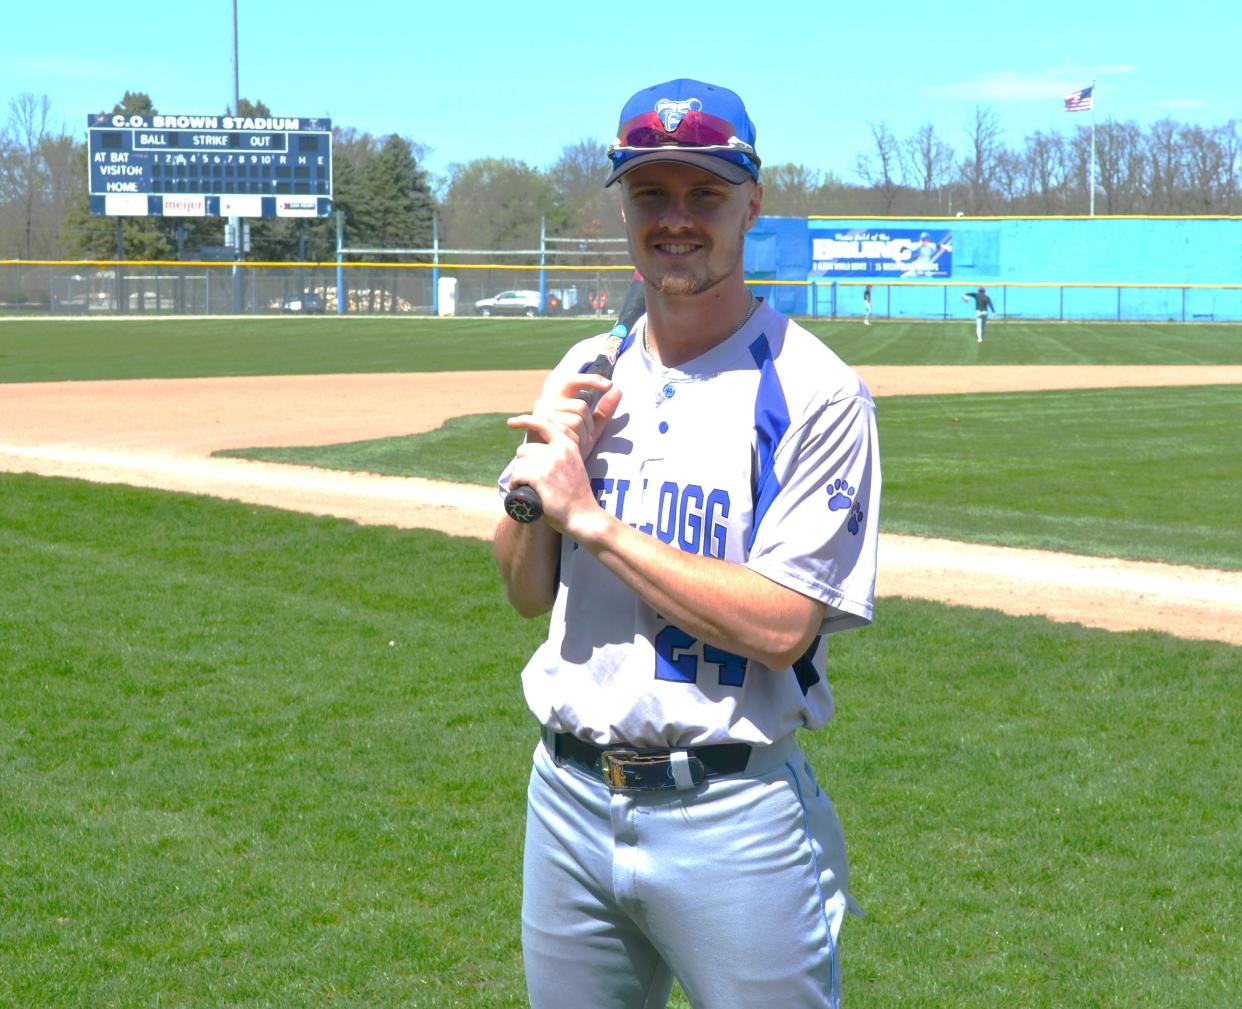 Former Pennfield High standout Cody Hultink has had a breakout first season with the Kellogg Community College baseball team, after coming in as a transfer from the University of Michigan.